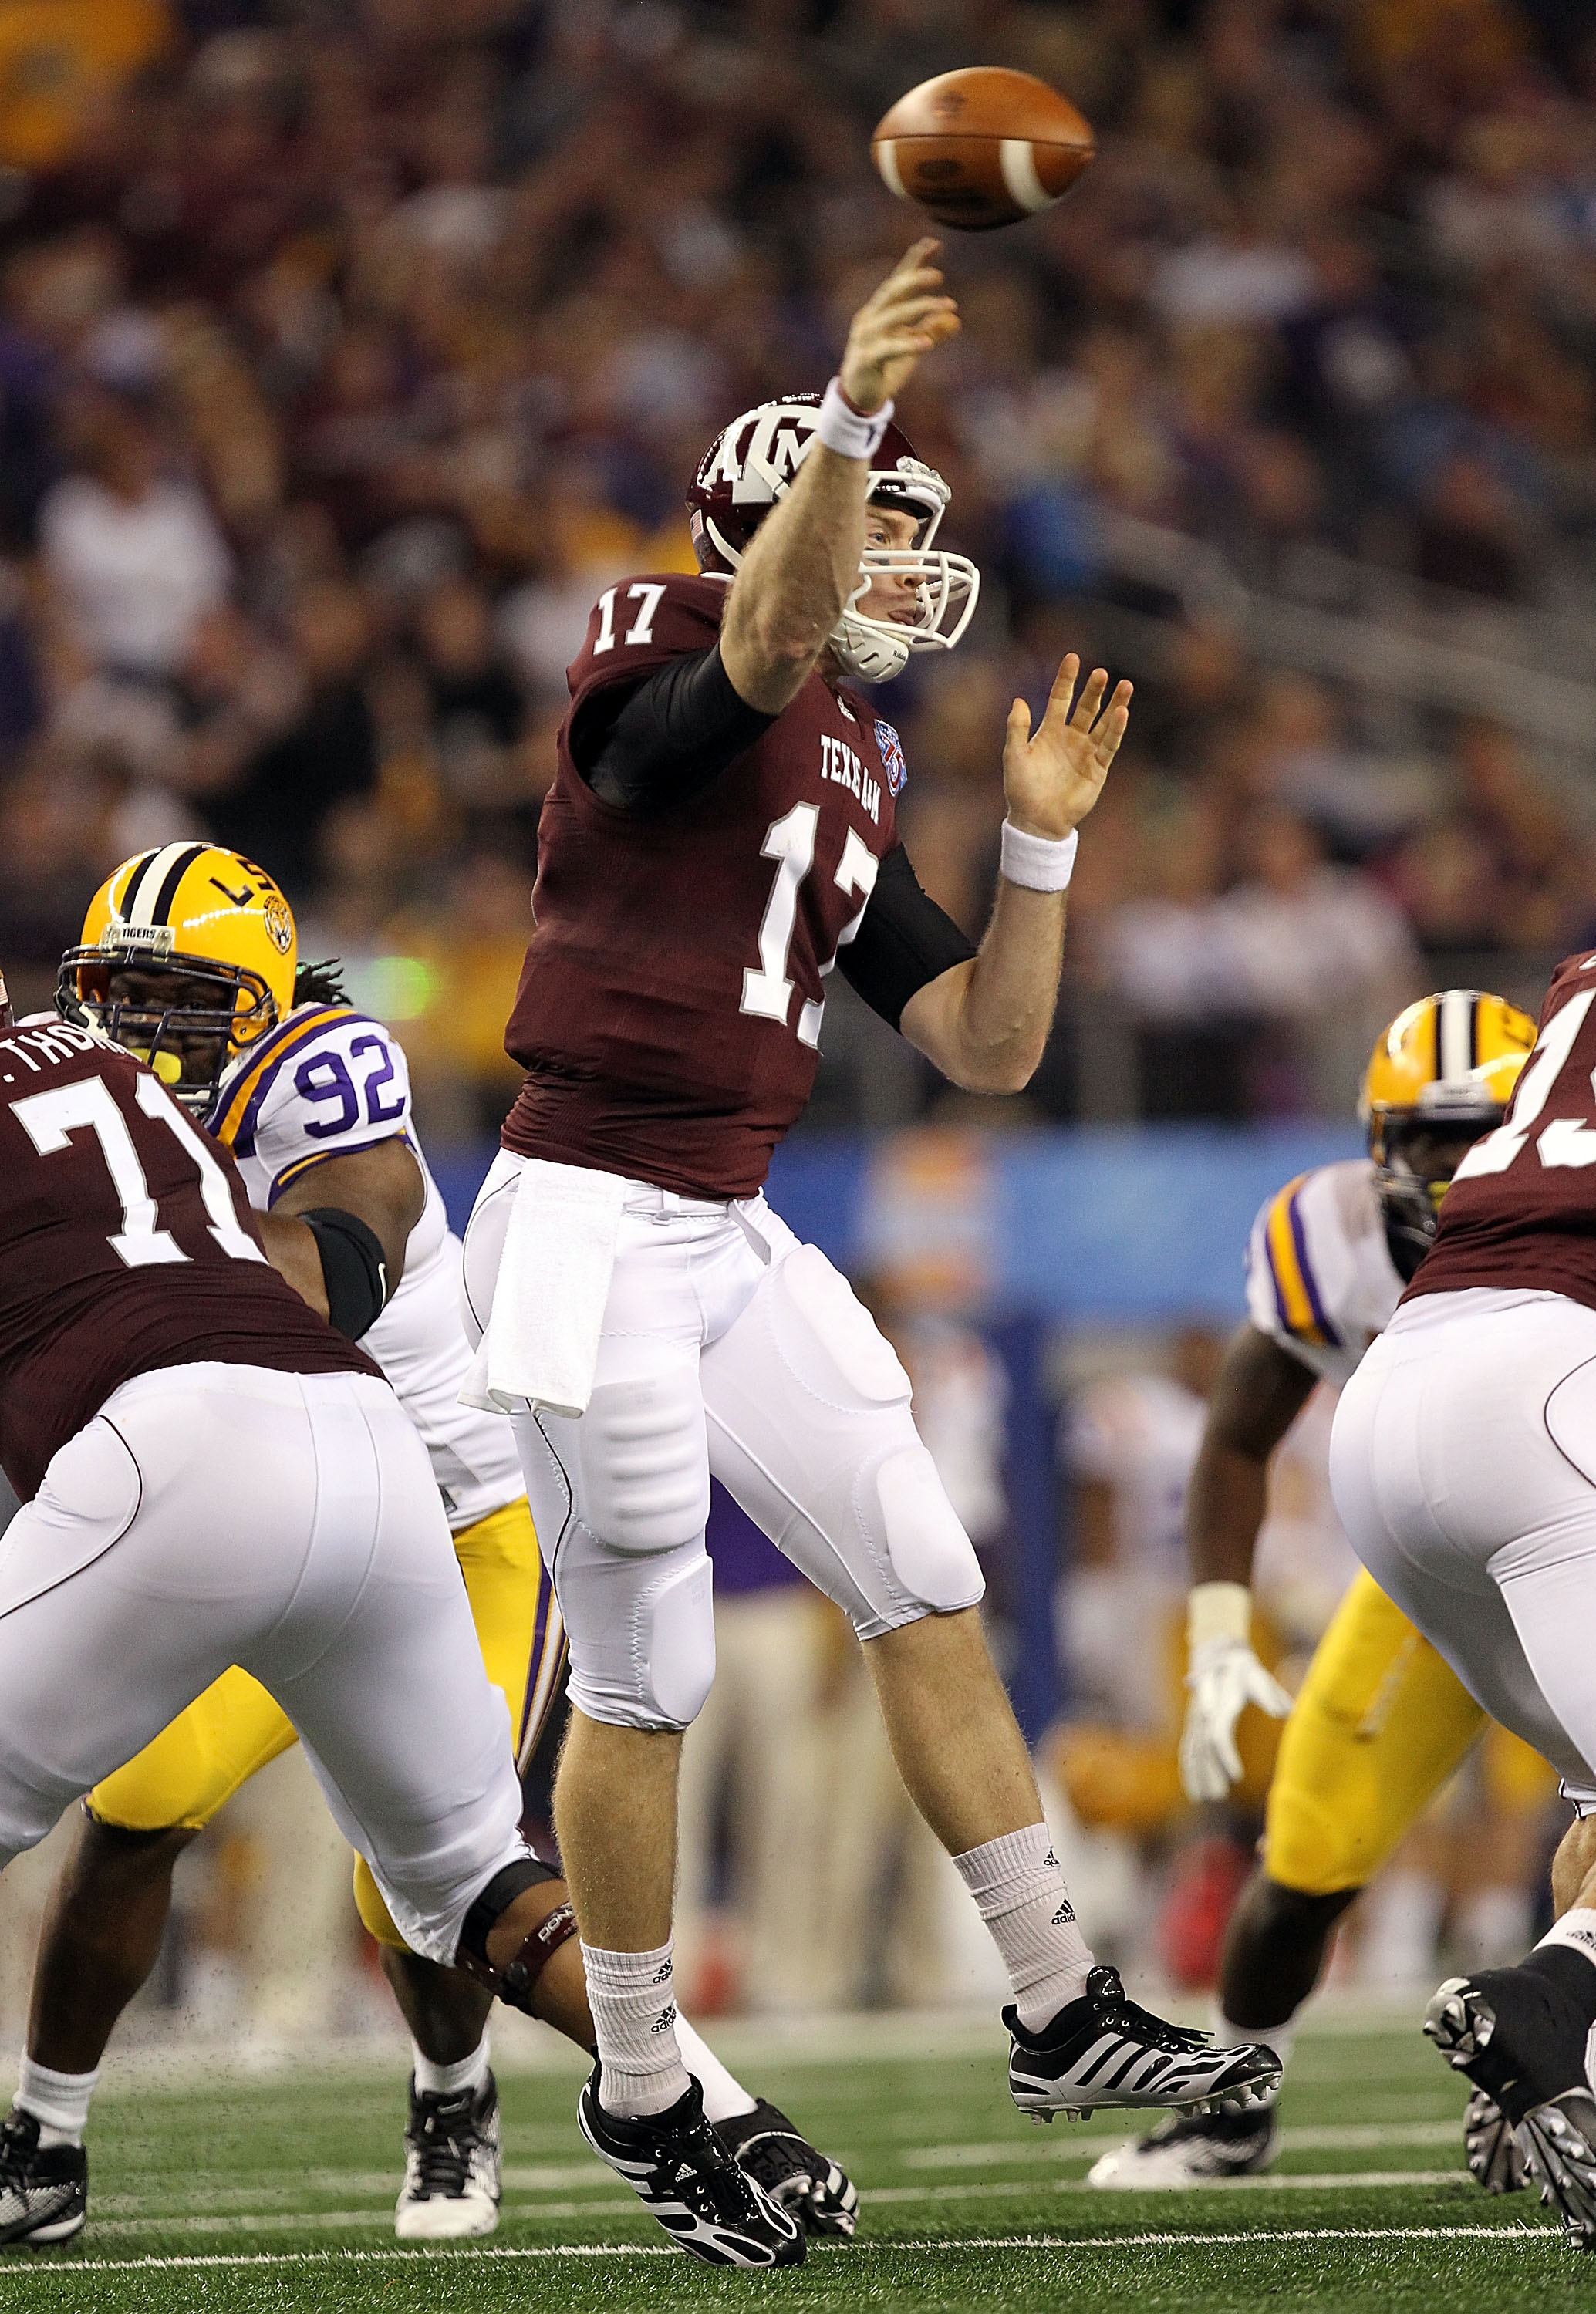 ARLINGTON, TX - JANUARY 07:  Quarterback Ryan Tannehill #17 of the Texas A&M Aggies throws against the LSU Tigers during the AT&T Cotton Bowl at Cowboys Stadium on January 7, 2011 in Arlington, Texas.  (Photo by Ronald Martinez/Getty Images)